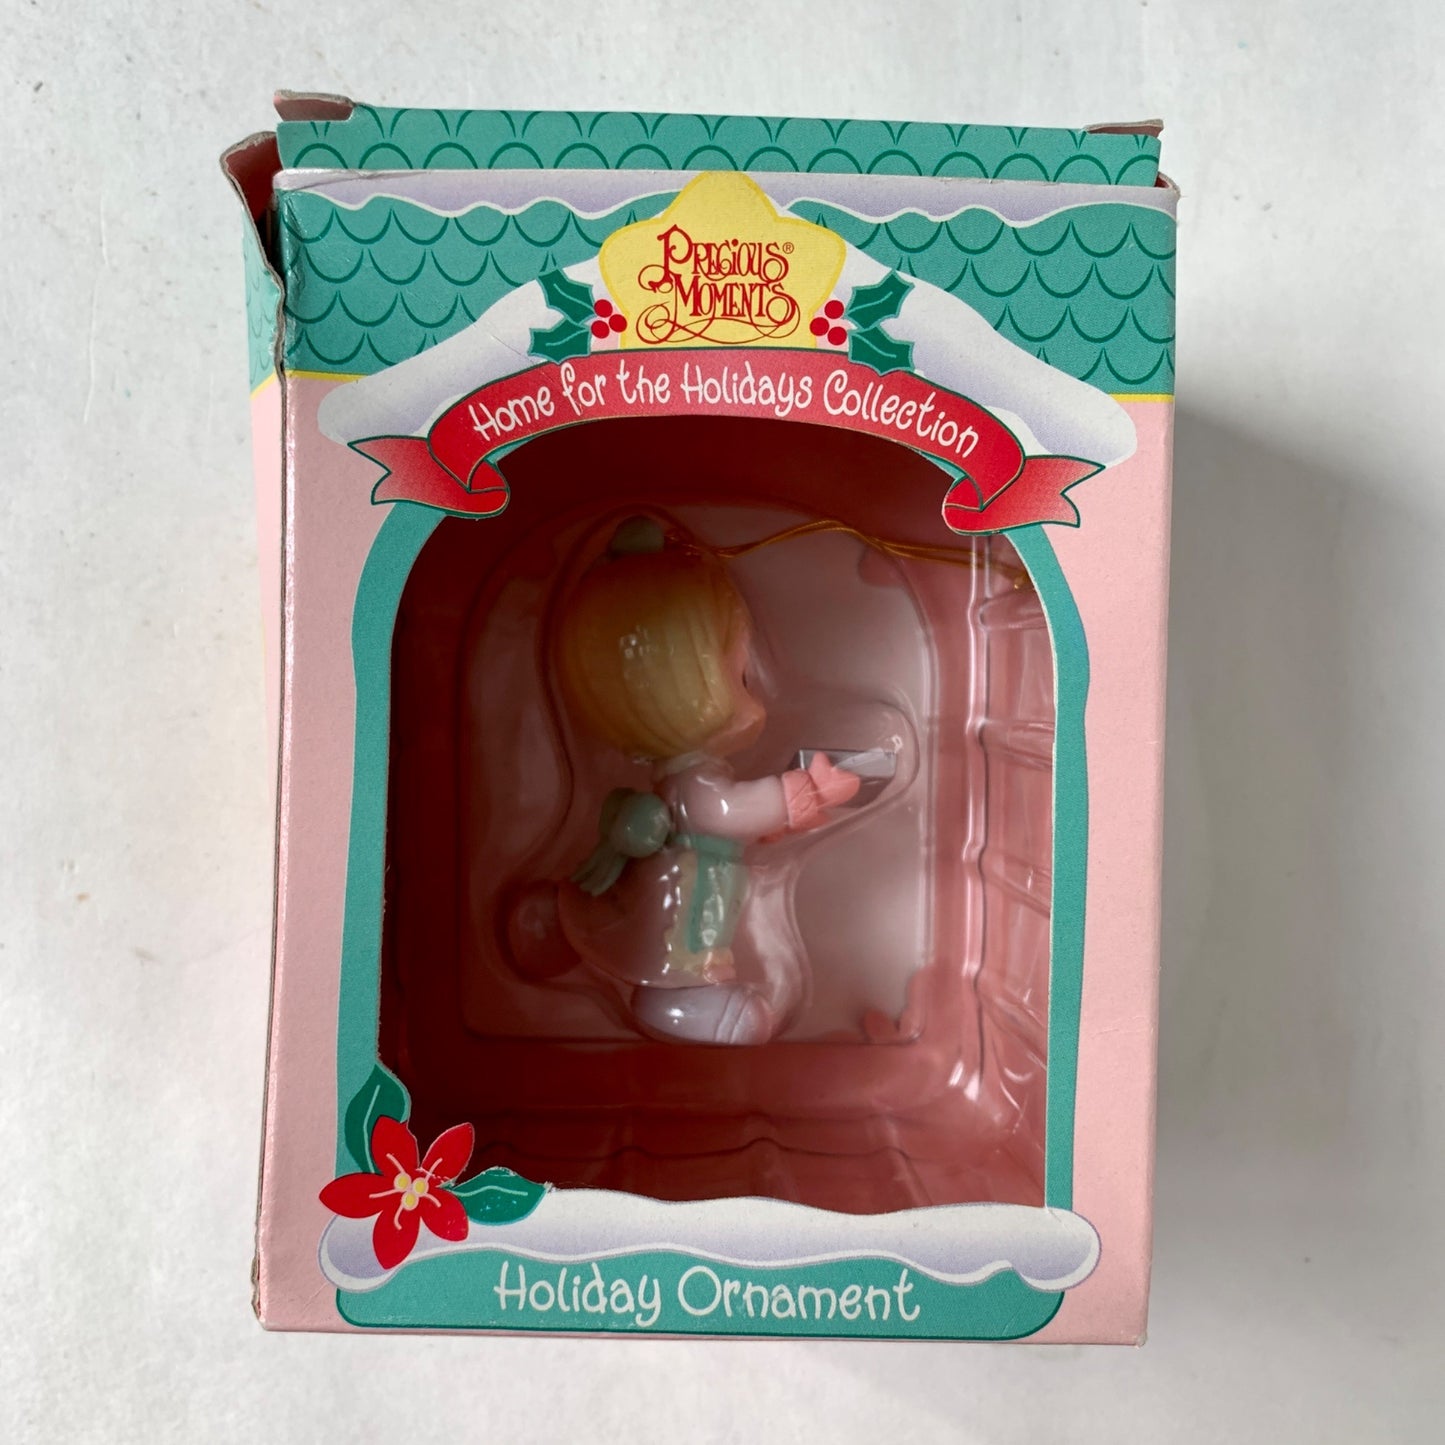 Precious Moments Home for the Holidays Collection Ornament 182370